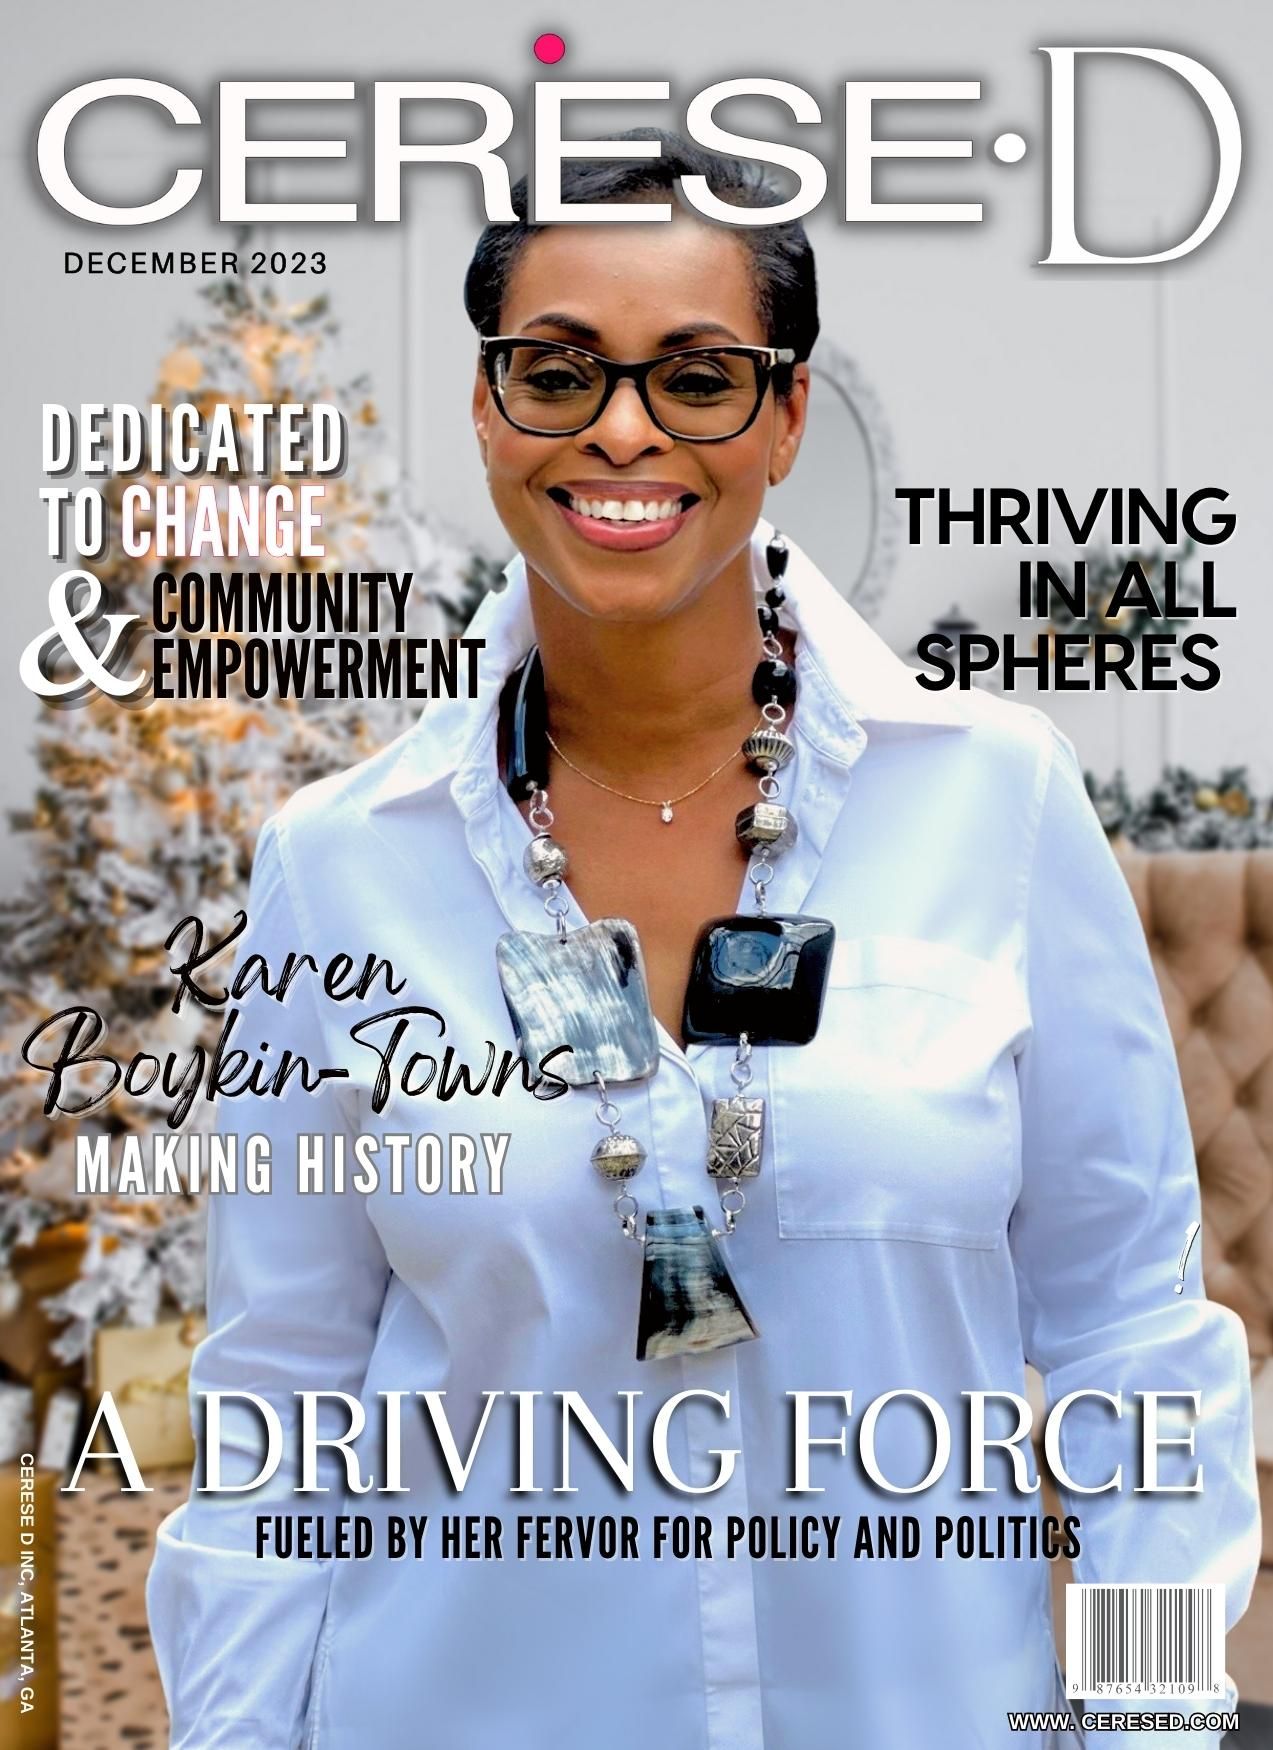 Woman standing in front of a holiday scene with a white christ,as tree in the background smiling with black rimmed glasses and wearing a white button up shirt with a large beaded necklace on a Cerese D magazine cover